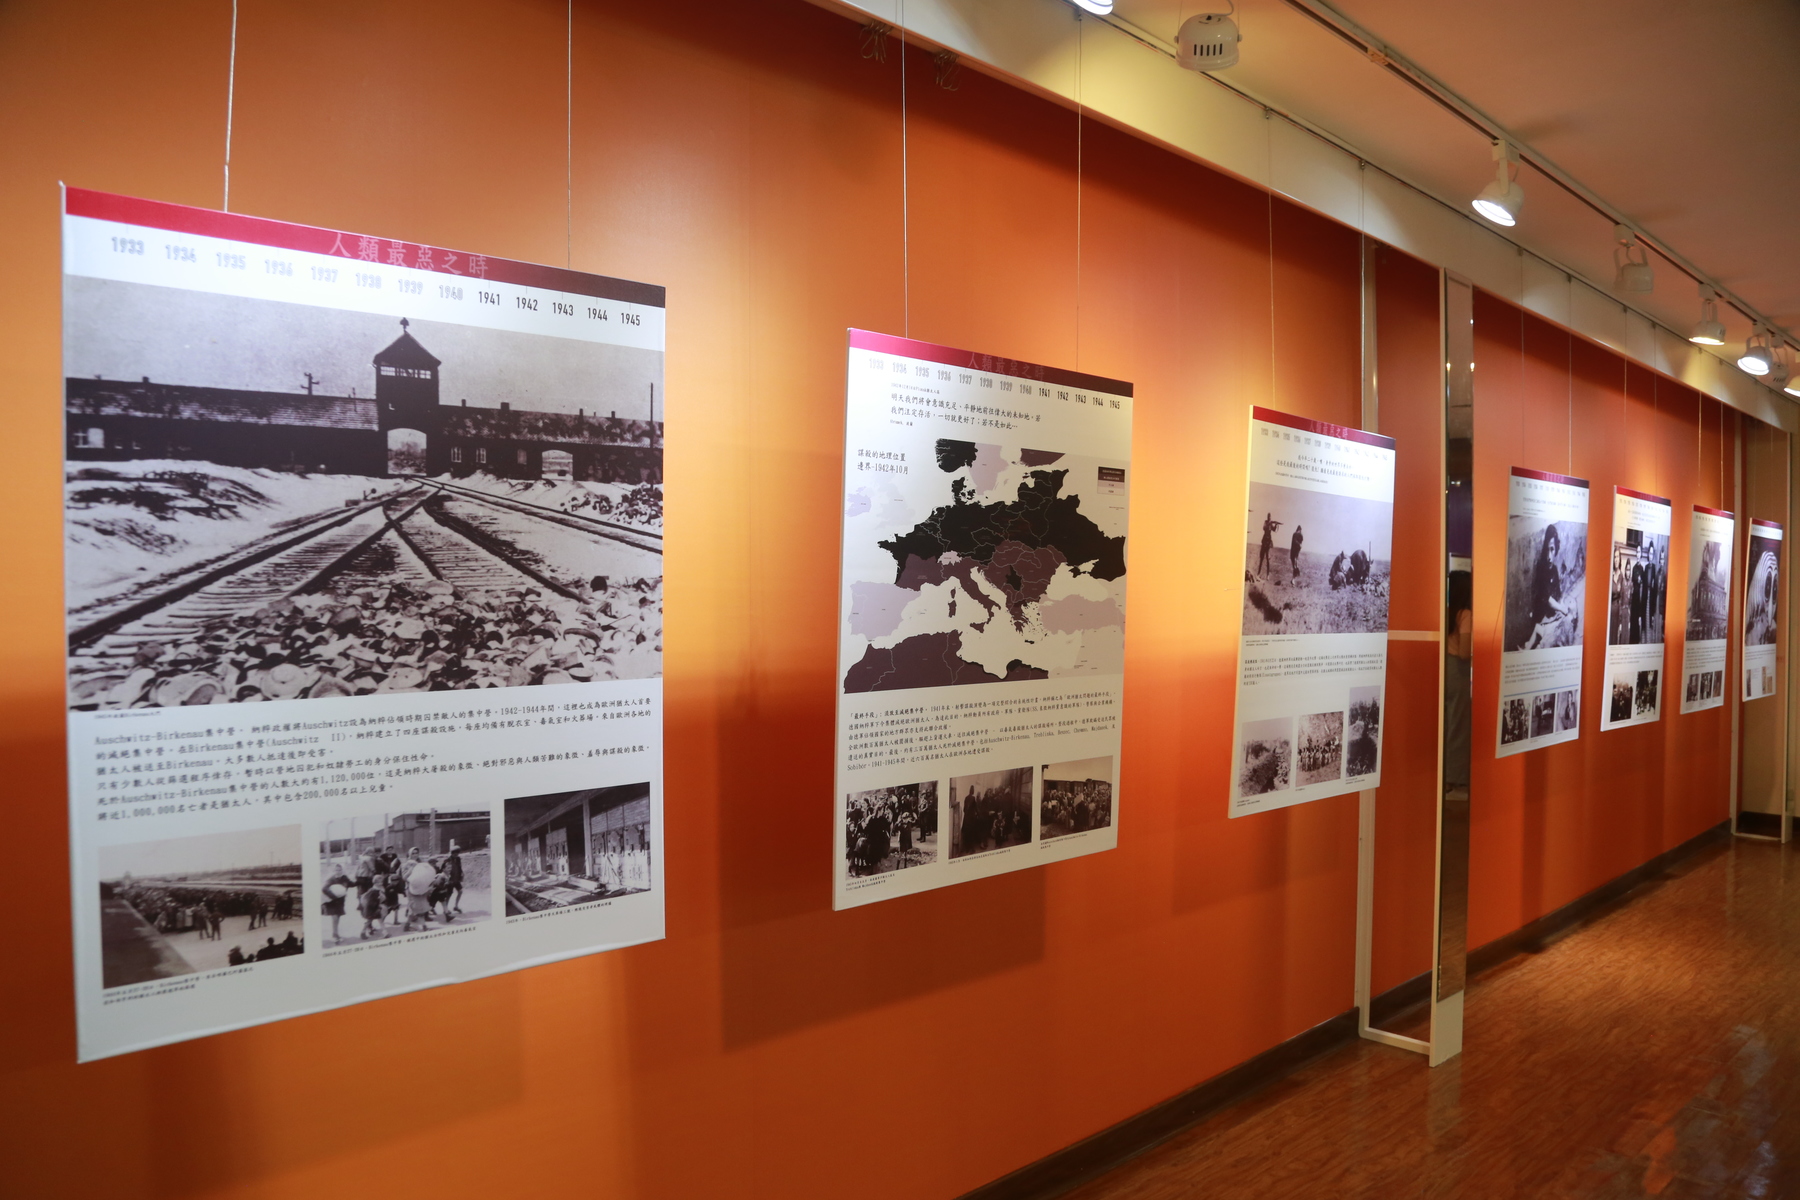 The Israel Economic and Cultural Office in Taipei and Yad Vashem - The World Holocaust Remembrance Center jointly organized a special exhibition – "SHOAH – How Was it Humanly Possible?", now showcased in the Art Exhibition Room on the 3rd floor of the Library Building of National Sun Yat-sen University until November 3.